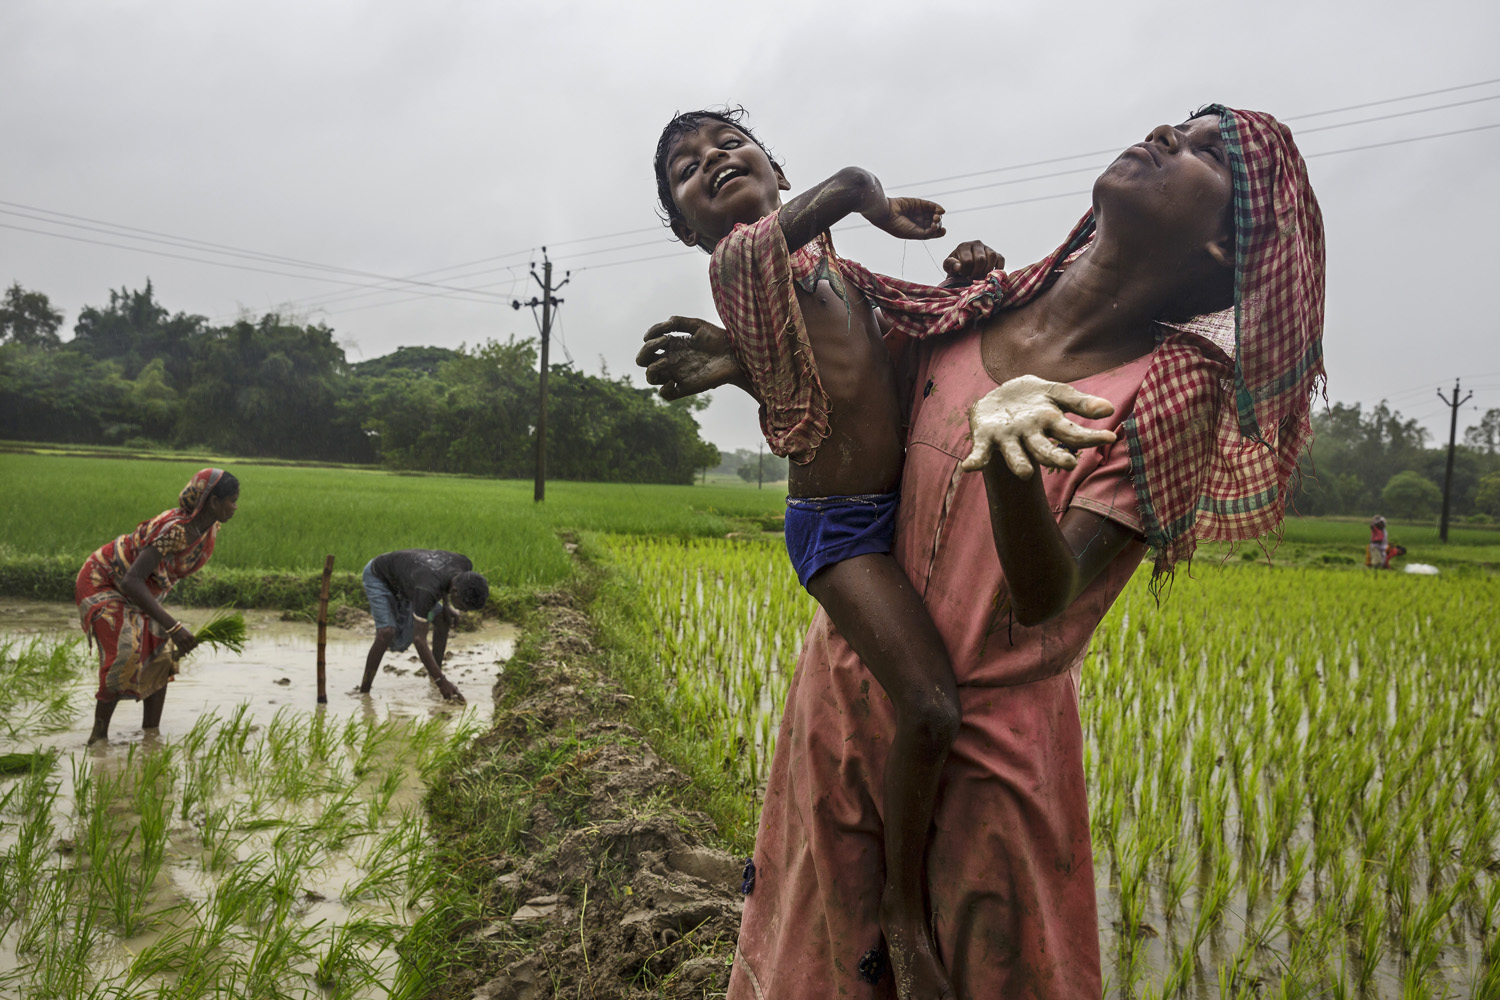 Sisters Sonia, right, and Anita Singh, who are both blind, let rain fall on their faces as their parents work nearby (Brent Stirton—Reportage by Getty Images)